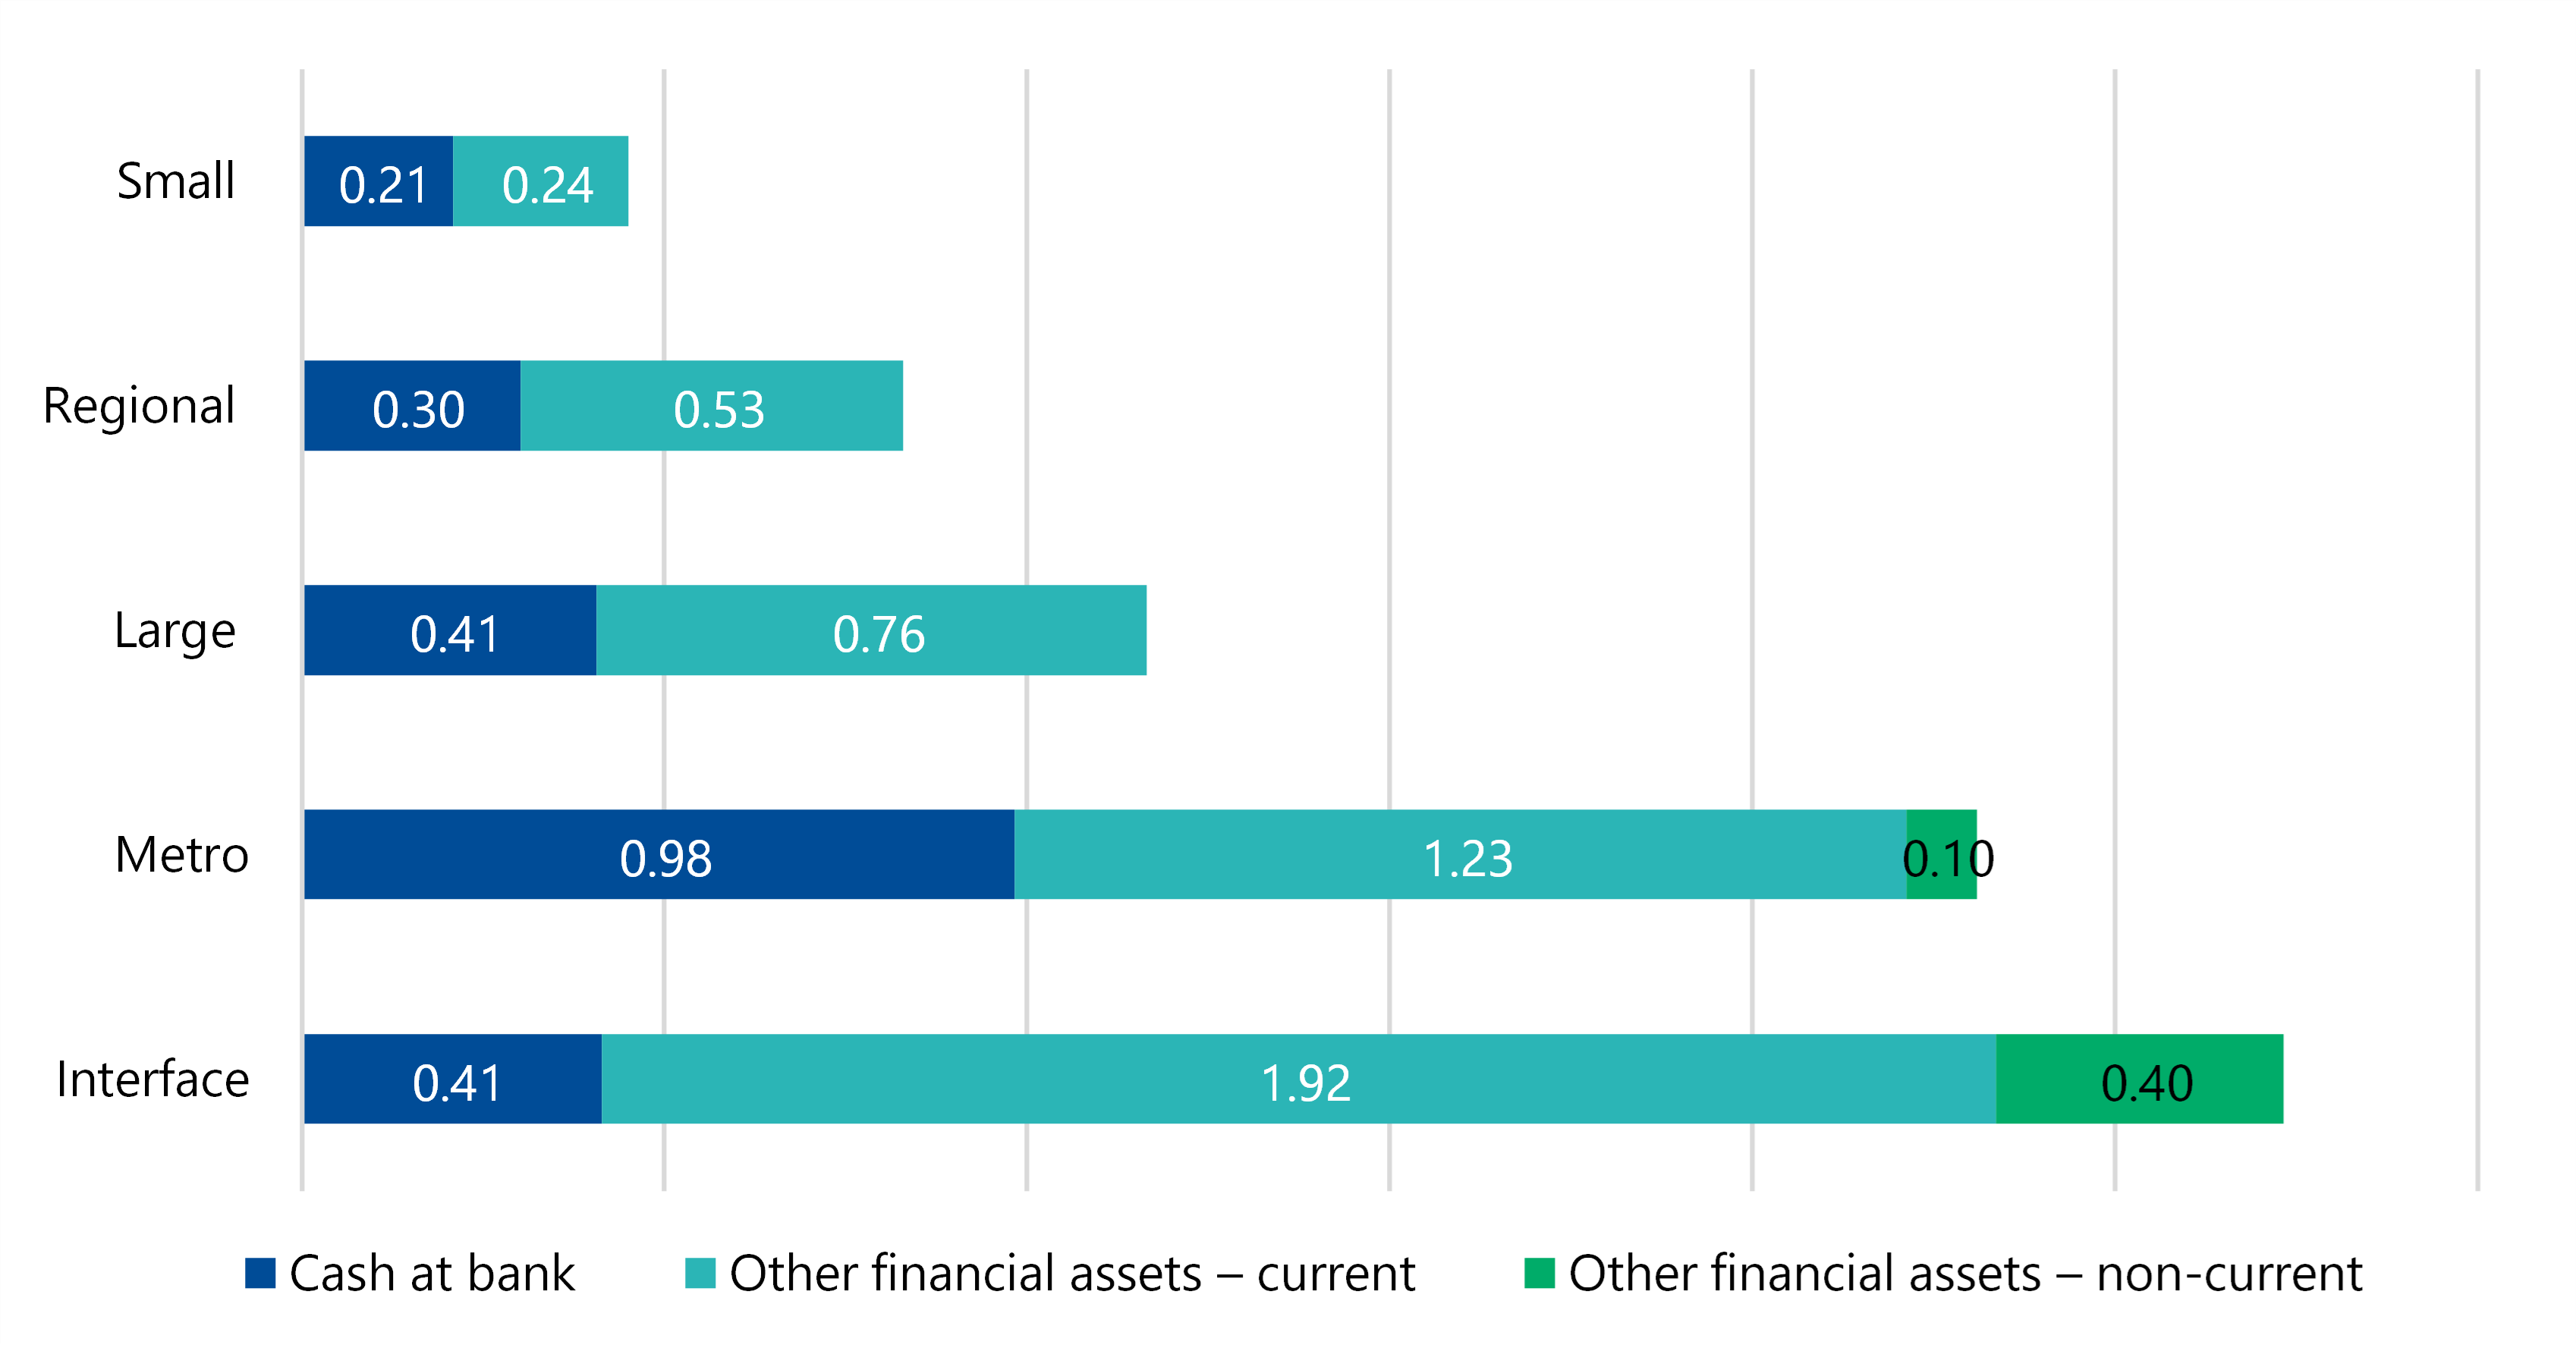 Figure 14 is a stacked br chart showing that, in 2022–23, all small shire councils together had $0.21 billion cash at bank and $0.24 billion in current other financial assets and no non-currrent financial assets. Regional councils had $0.30 billion cash at bank and $0.53 billion in current other financial assets and no non-currrent financial assets. Large shire councils had $0.41 billion cash at bank and $0.76 billion in current other financial assets, with no non-currrent financial assets. Metro councils had $0.98 billion cash at bank and $1.23 billion in current other financial assets, and also had $0.10 billion in non-currrent financial assets. Interface councils had $0.41 billion cash at bank and $1.92 billion in current other financial assets, plus $0.40 billion in non-currrent financial assets.